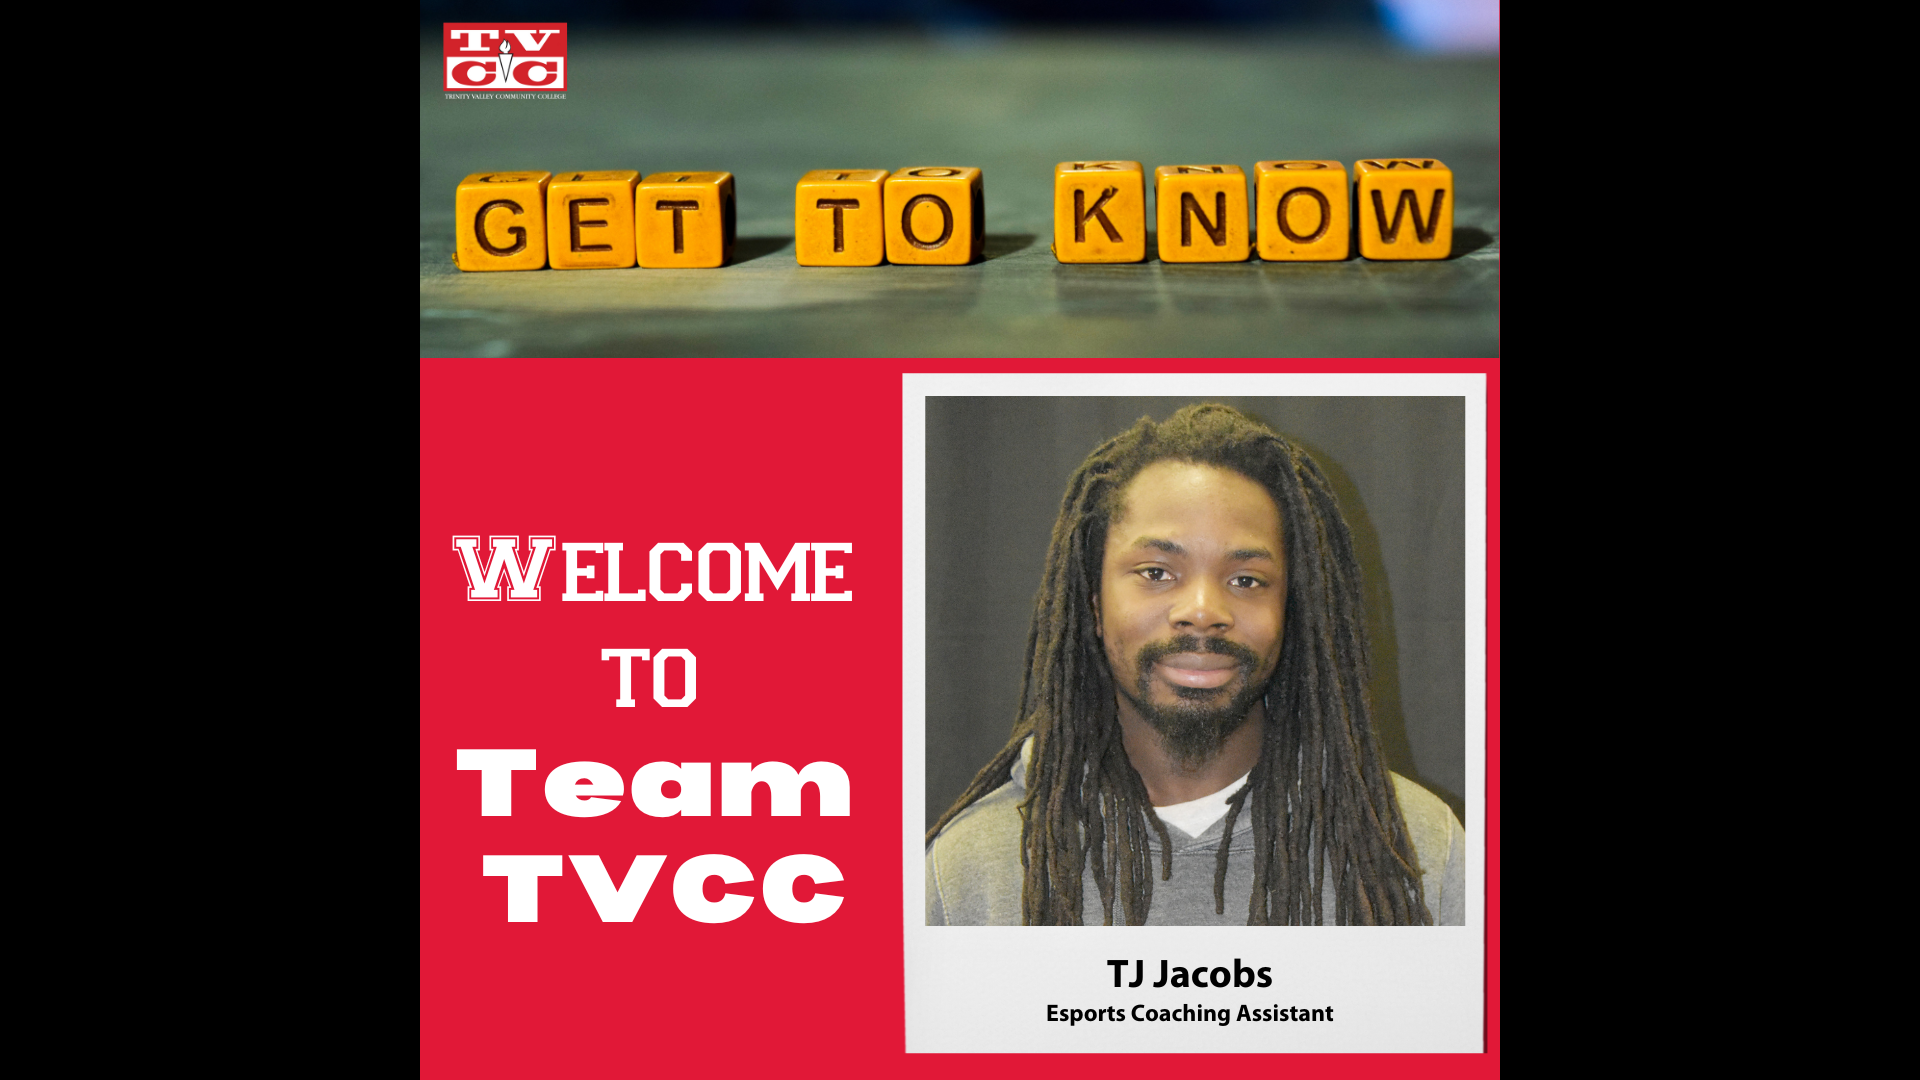 WELCOME TO THE VALLEY: Tensly (TJ) Jacobs